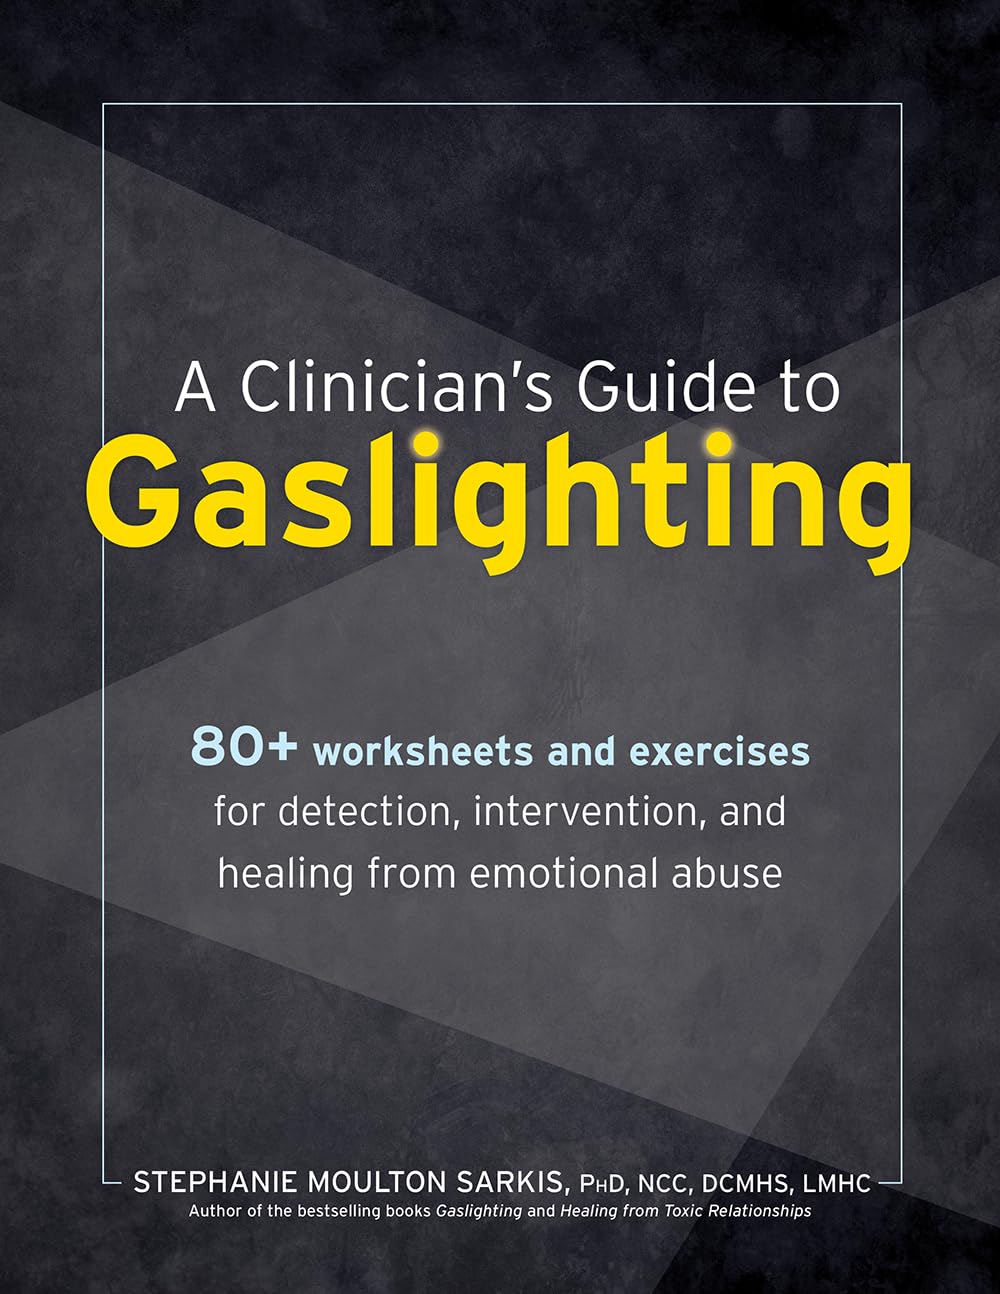 A Clinician’s Guide to Gaslighting. Book cover.